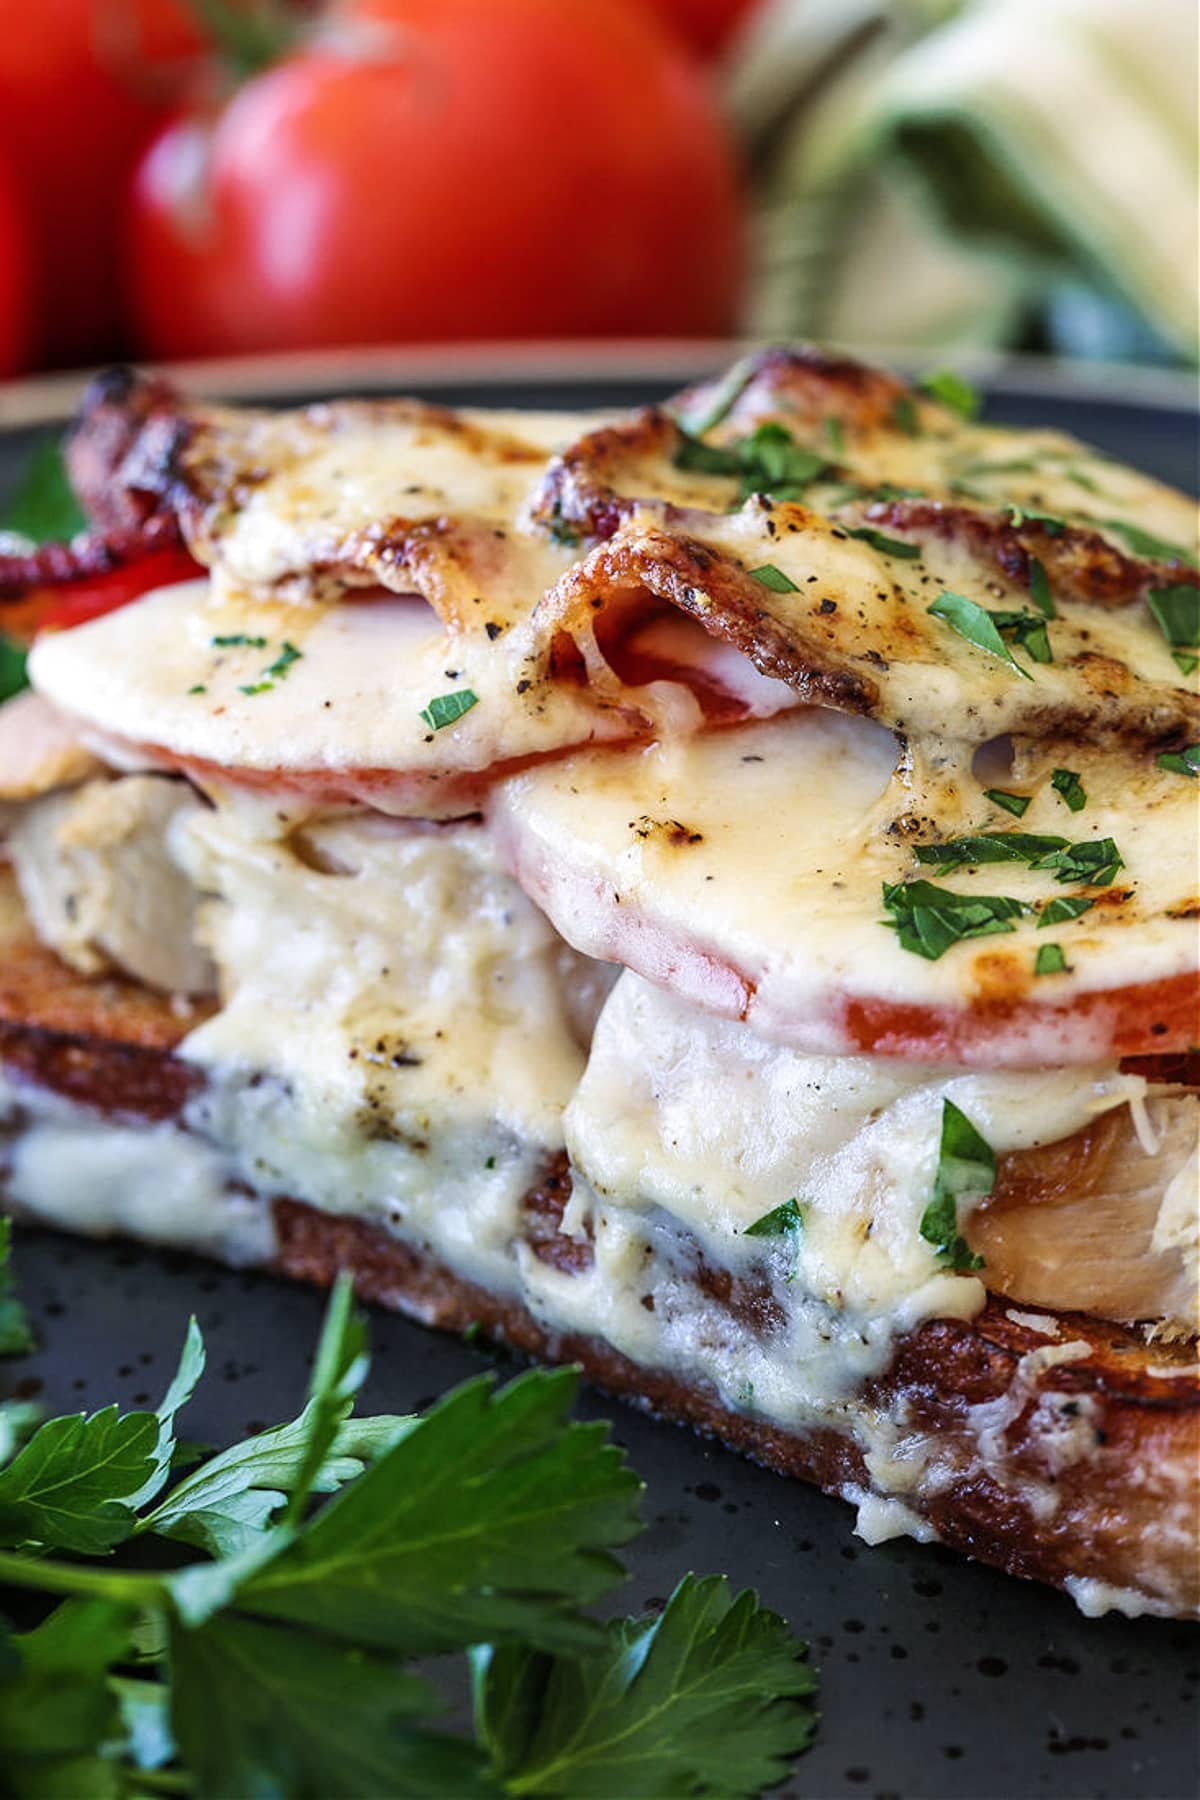 kentucky hot brown sandwich on plate with Mornay sauce